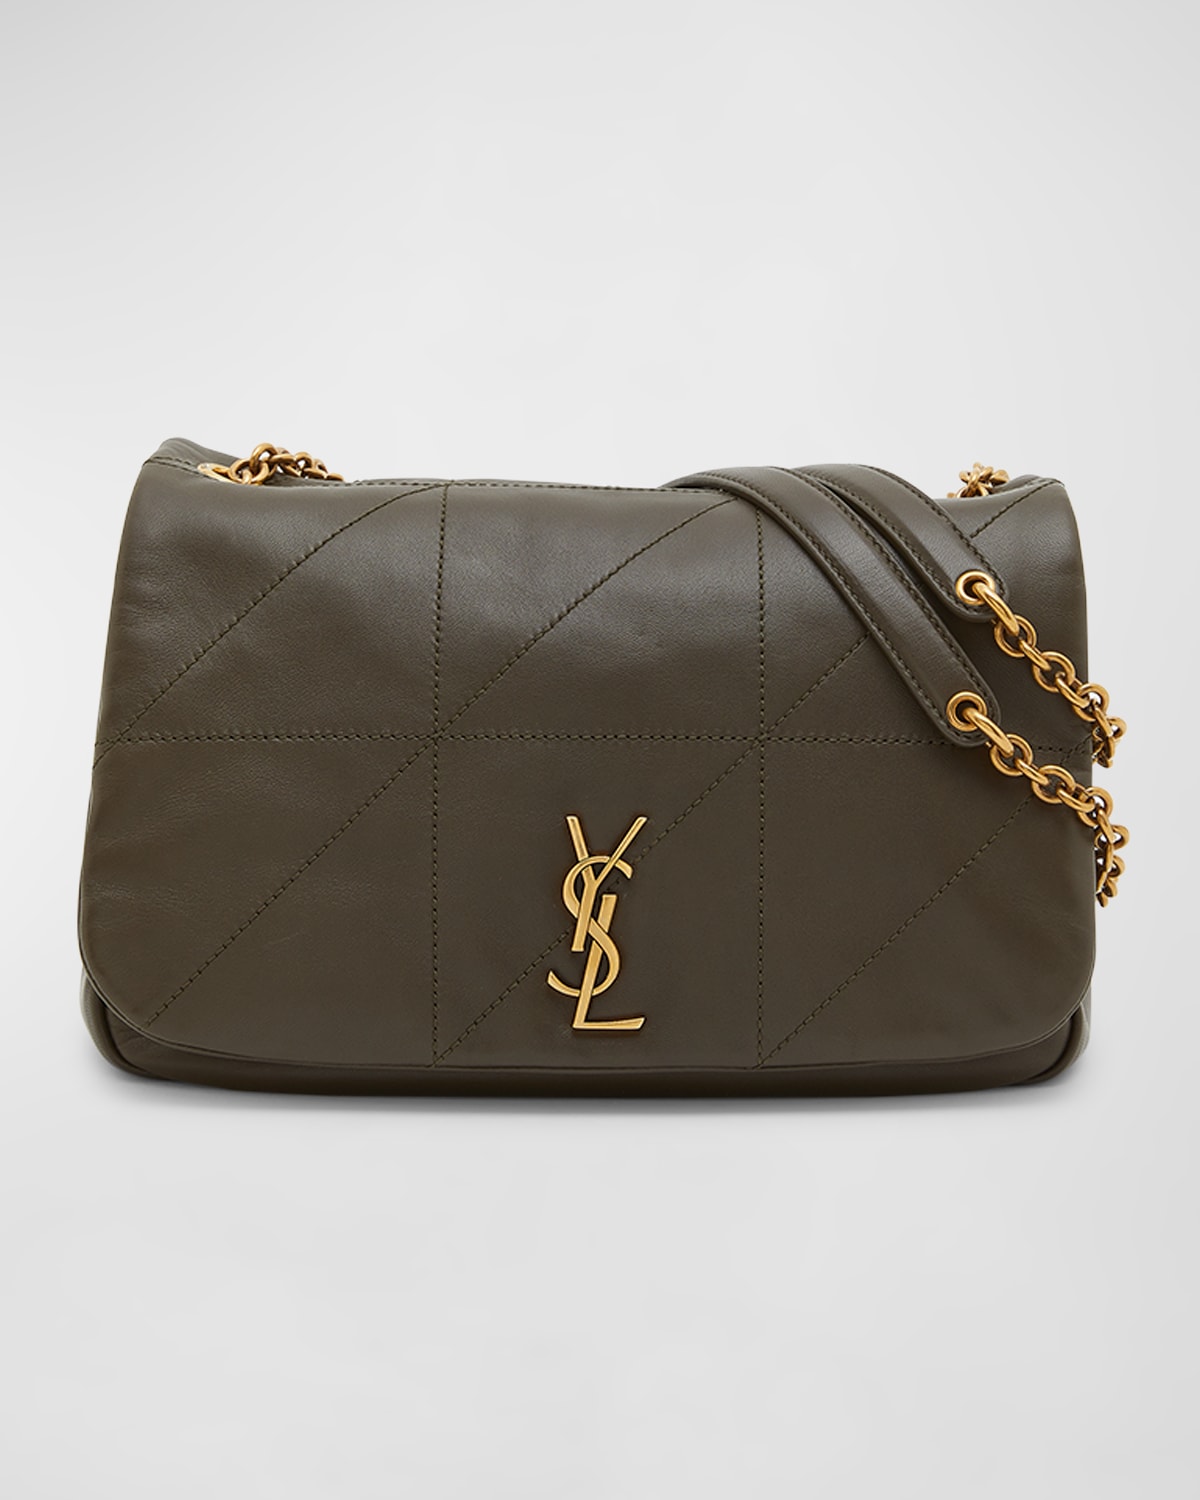 SAINT LAURENT JAMIE 4.3 SMALL YSL SHOULDER BAG IN QUILTED SMOOTH LEATHER